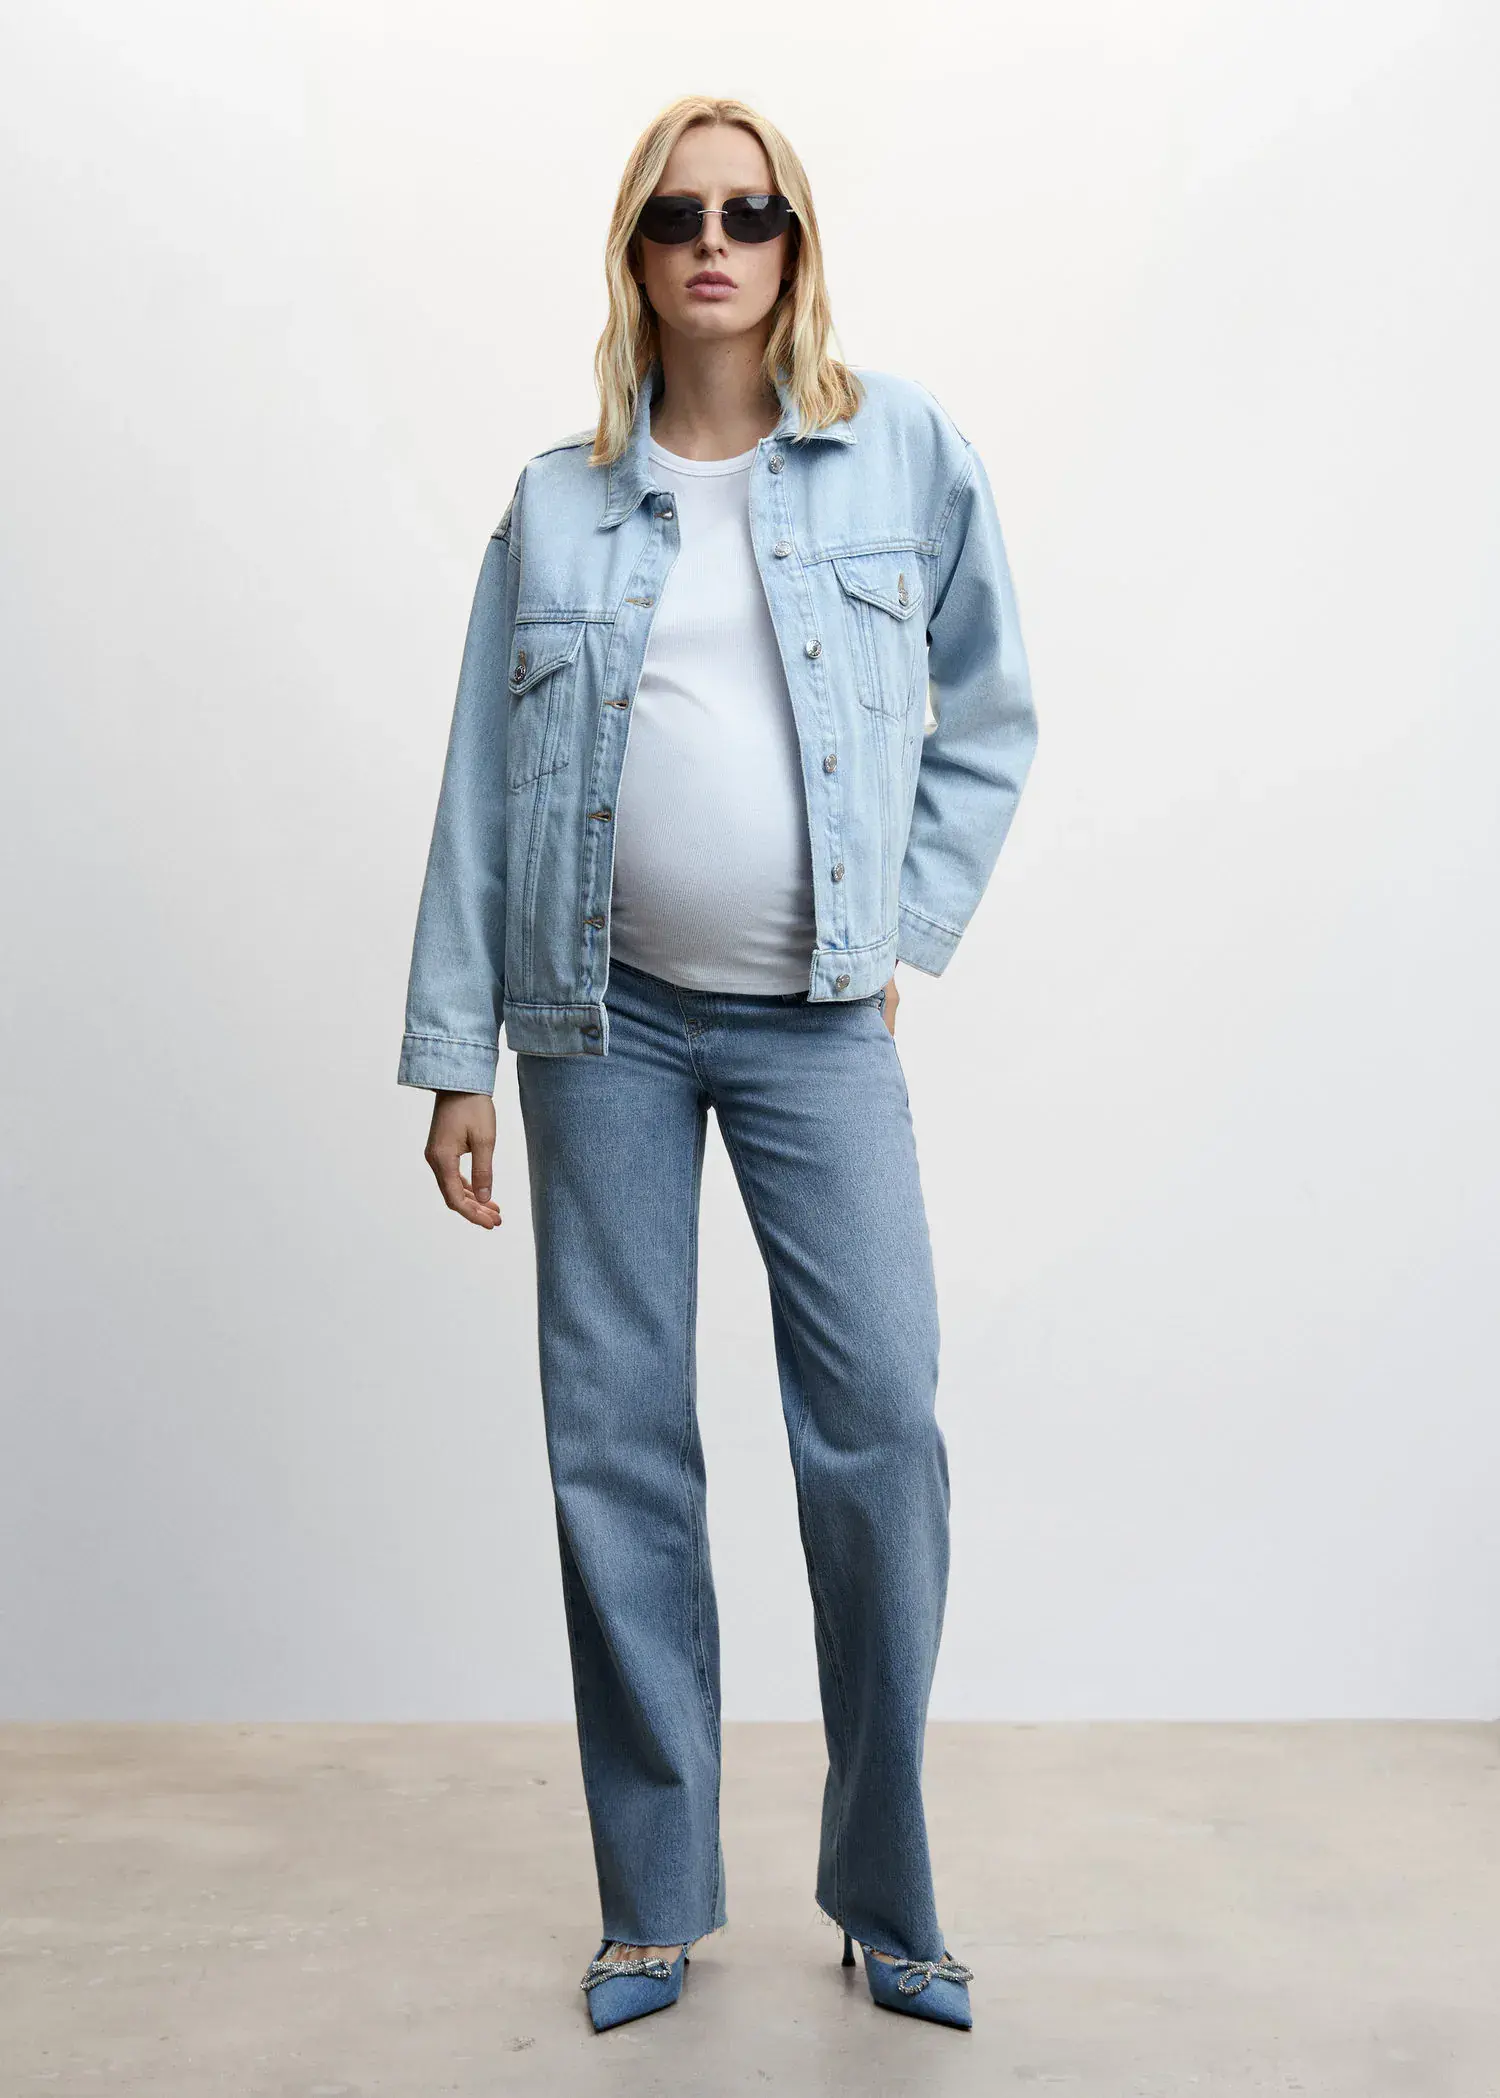 Mango Maternity wideleg jeans. a pregnant woman wearing jeans and a jacket. 